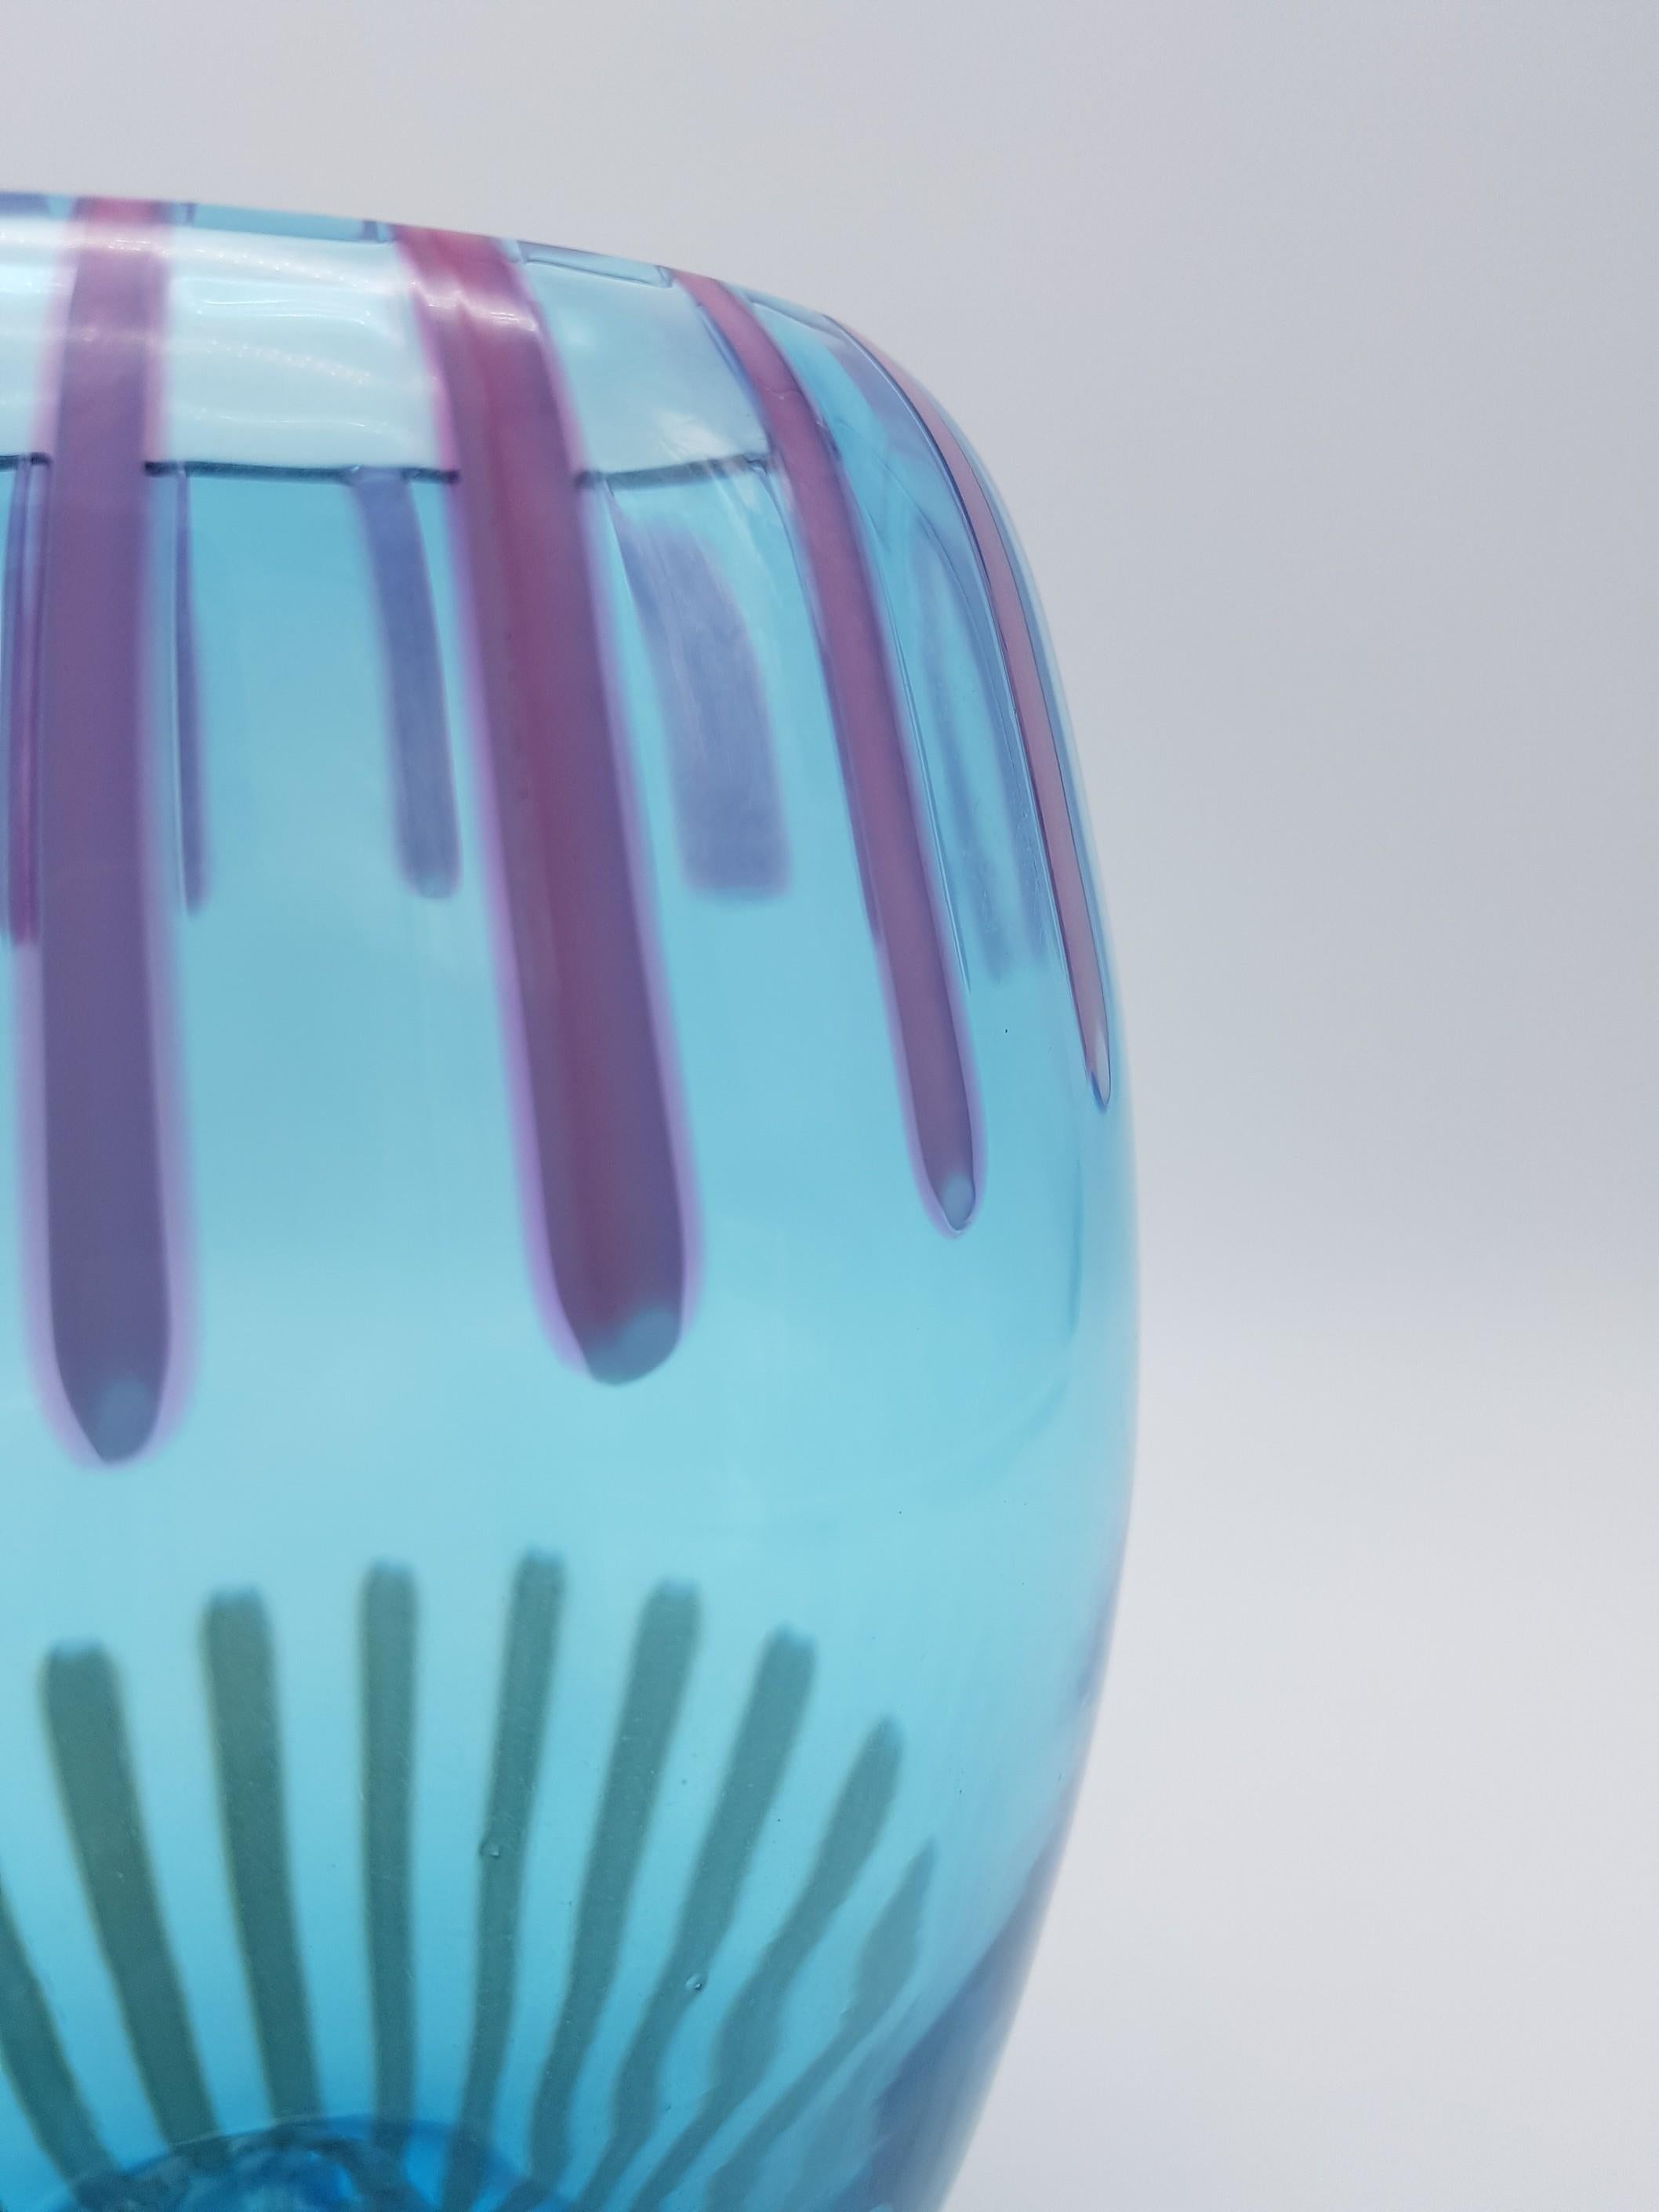 Hand-Crafted Modern Turquoise/Blue Murano-Glass Vase by Gino Cenedese E Figlio, late 1990s For Sale